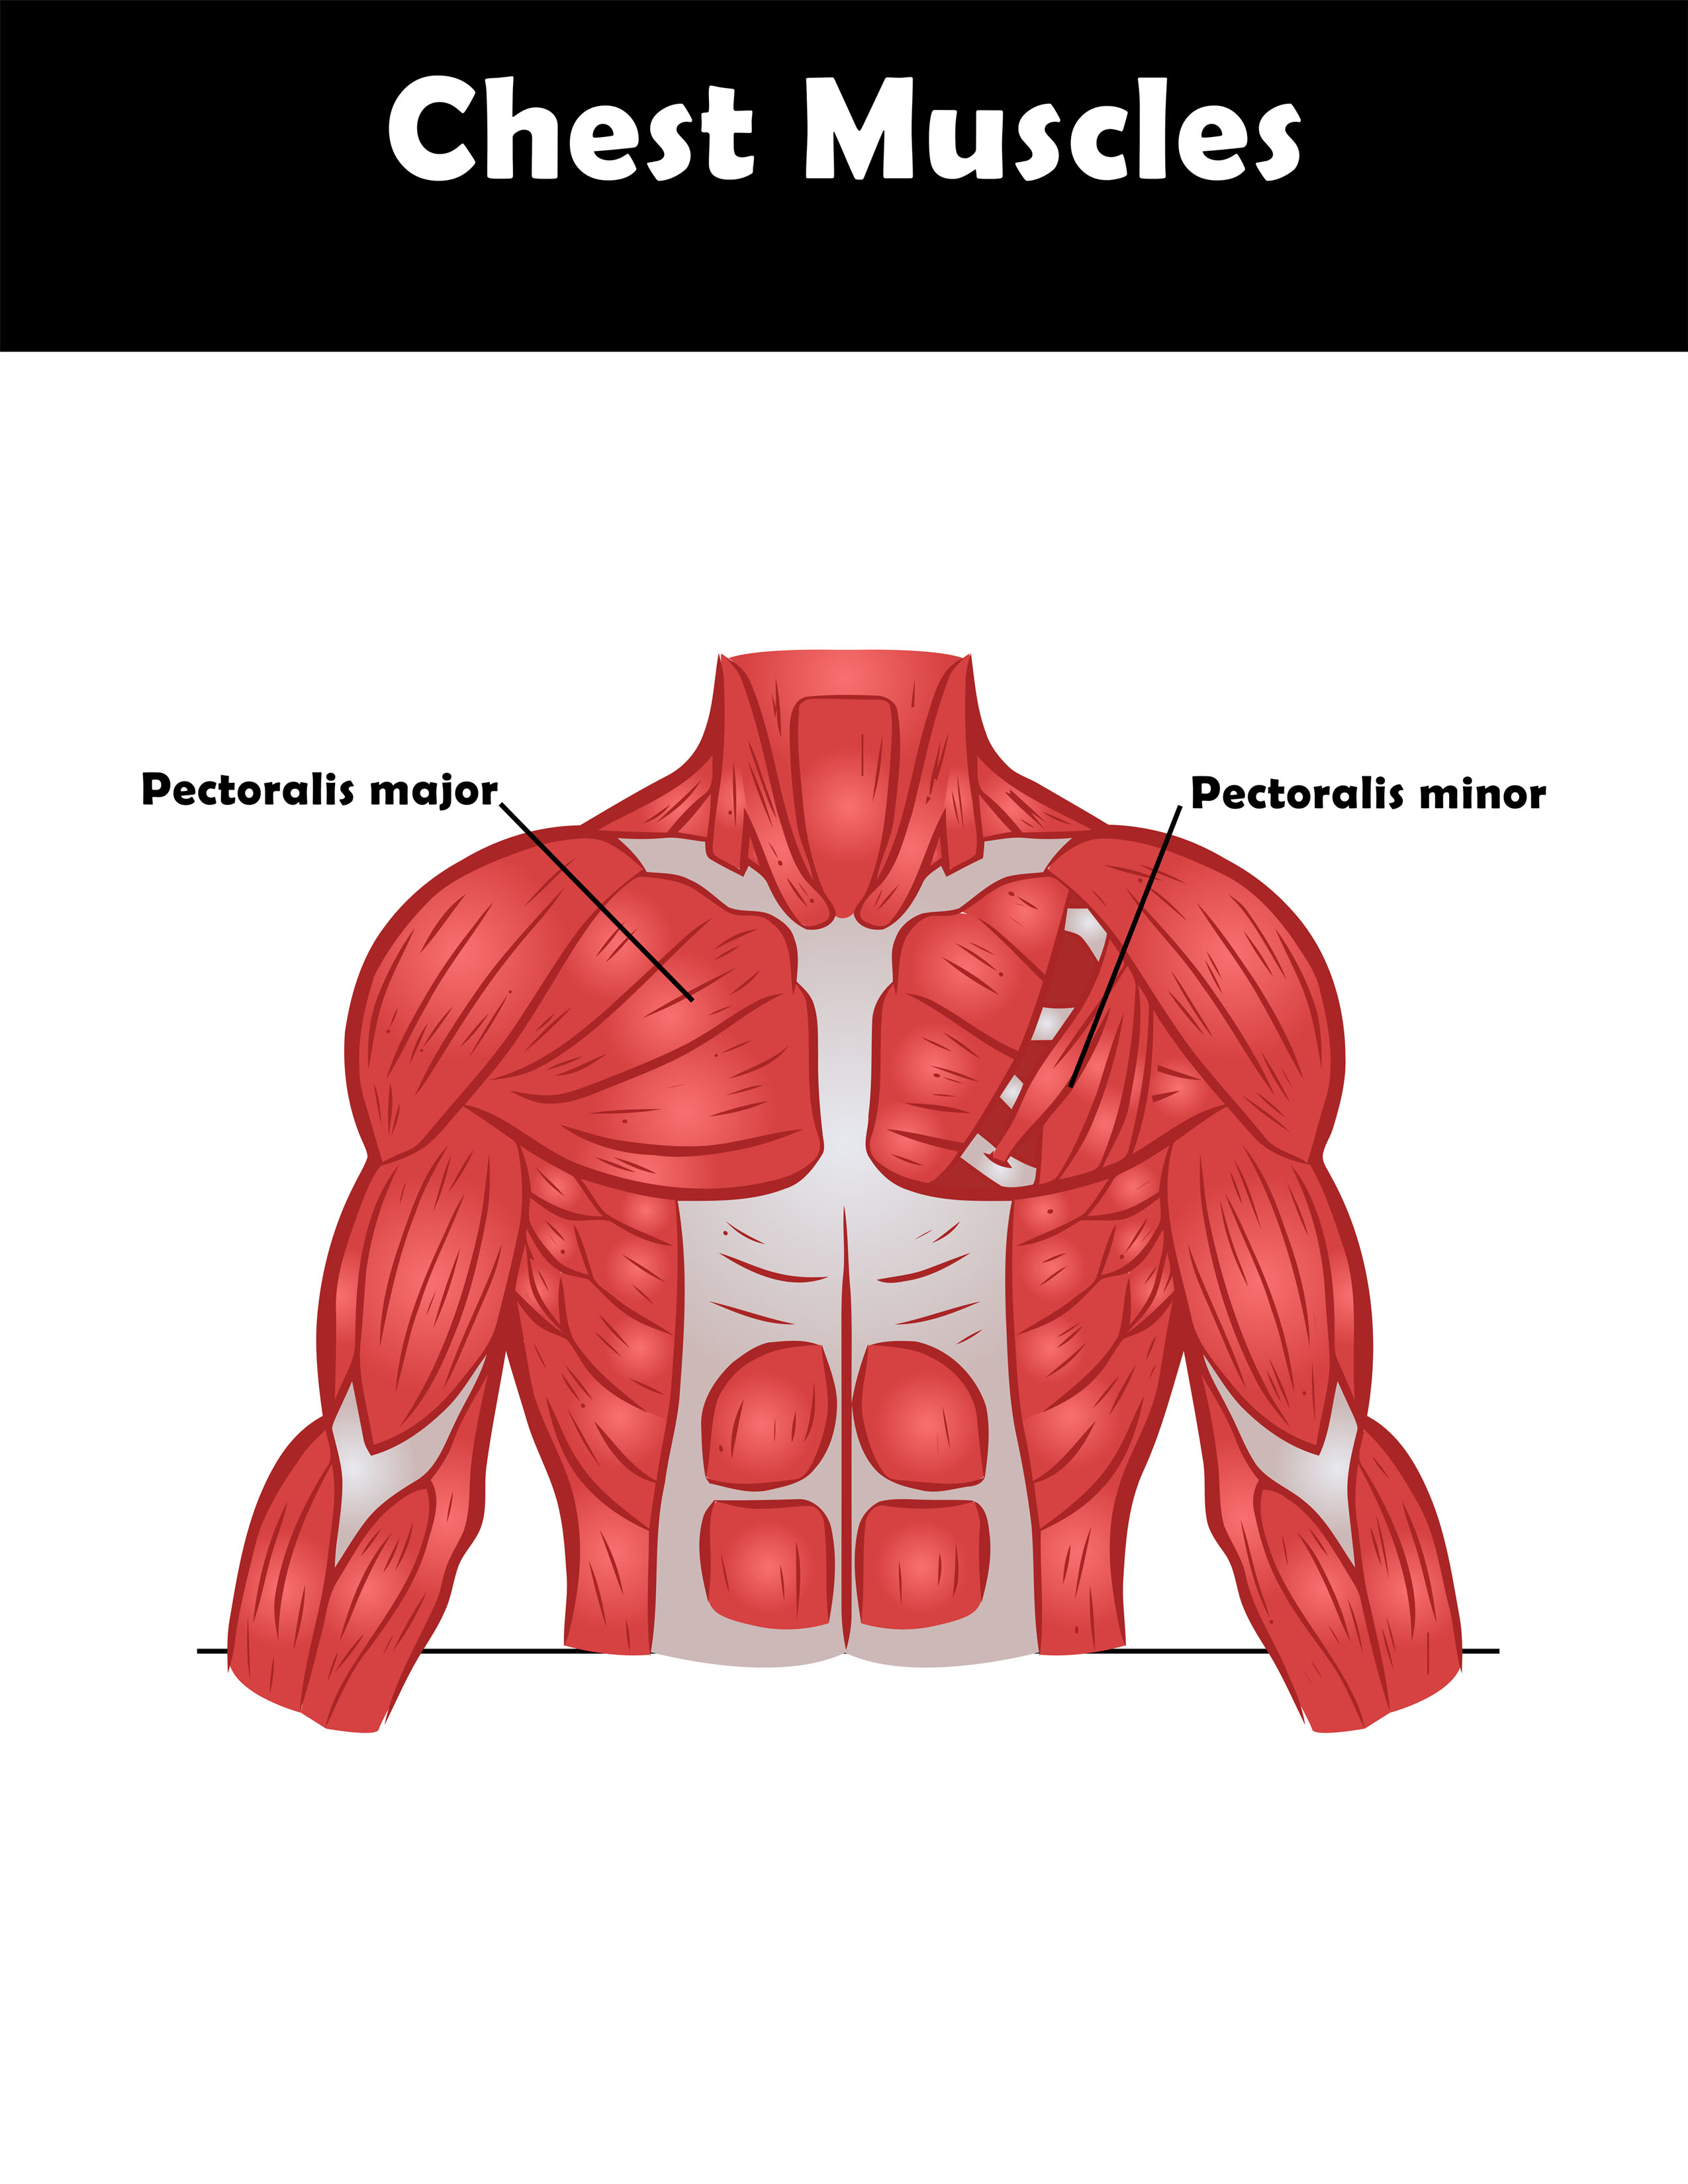 Chest muscle exercise anatomy chart you can download and print. 